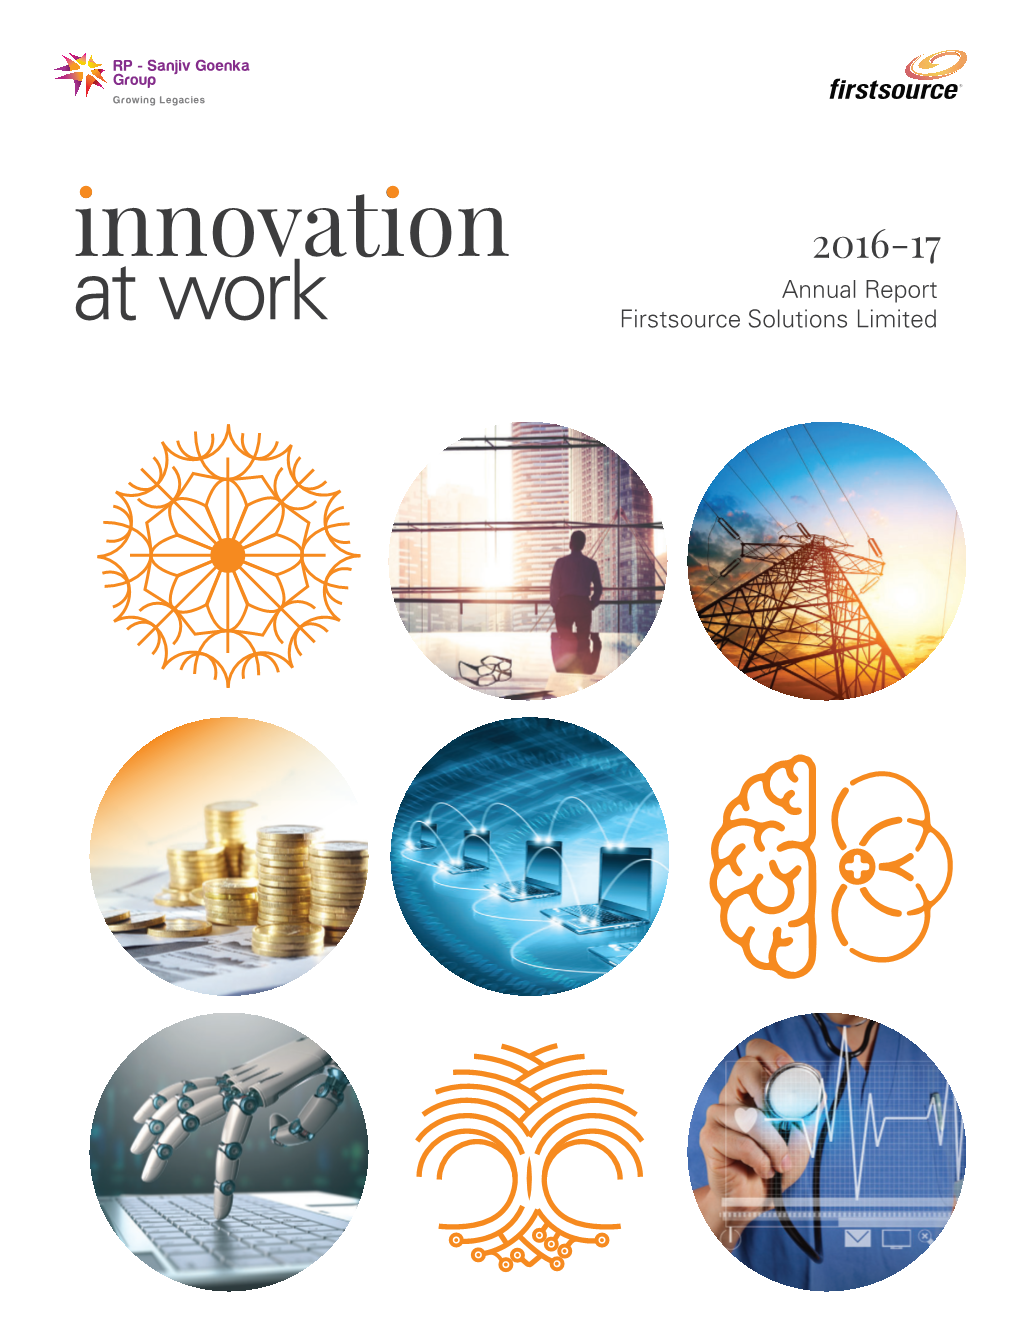 Innovation 2016-17 Annual Report at Work Firstsource Solutions Limited Inside the Report